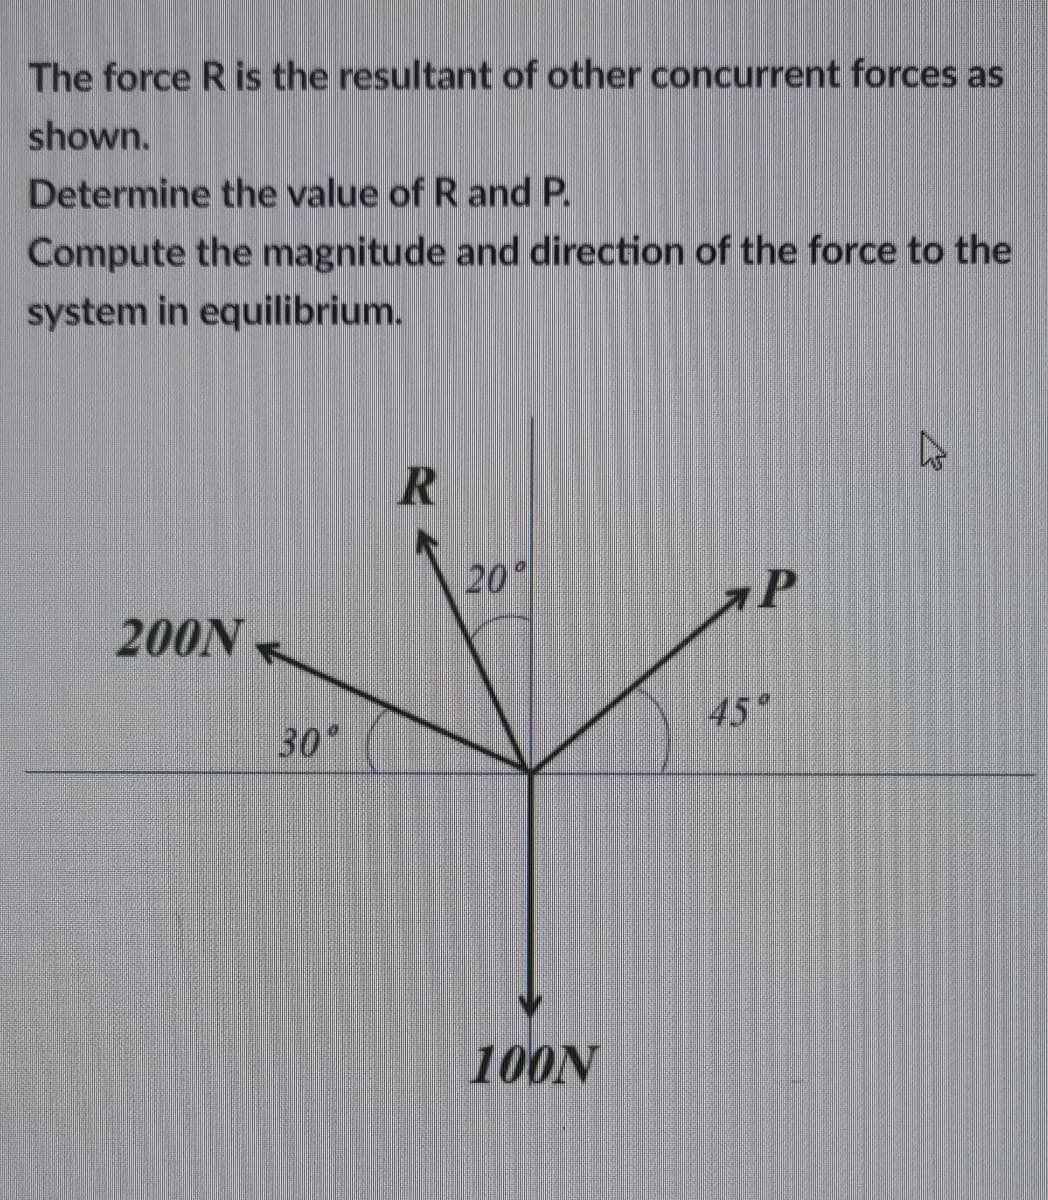 The force R is the resultant of other concurrent forces as
shown.
Determine the value of R and P.
Compute the magnitude and direction of the force to the
system in equilibrium.
20
200N
45°
30°
100N
